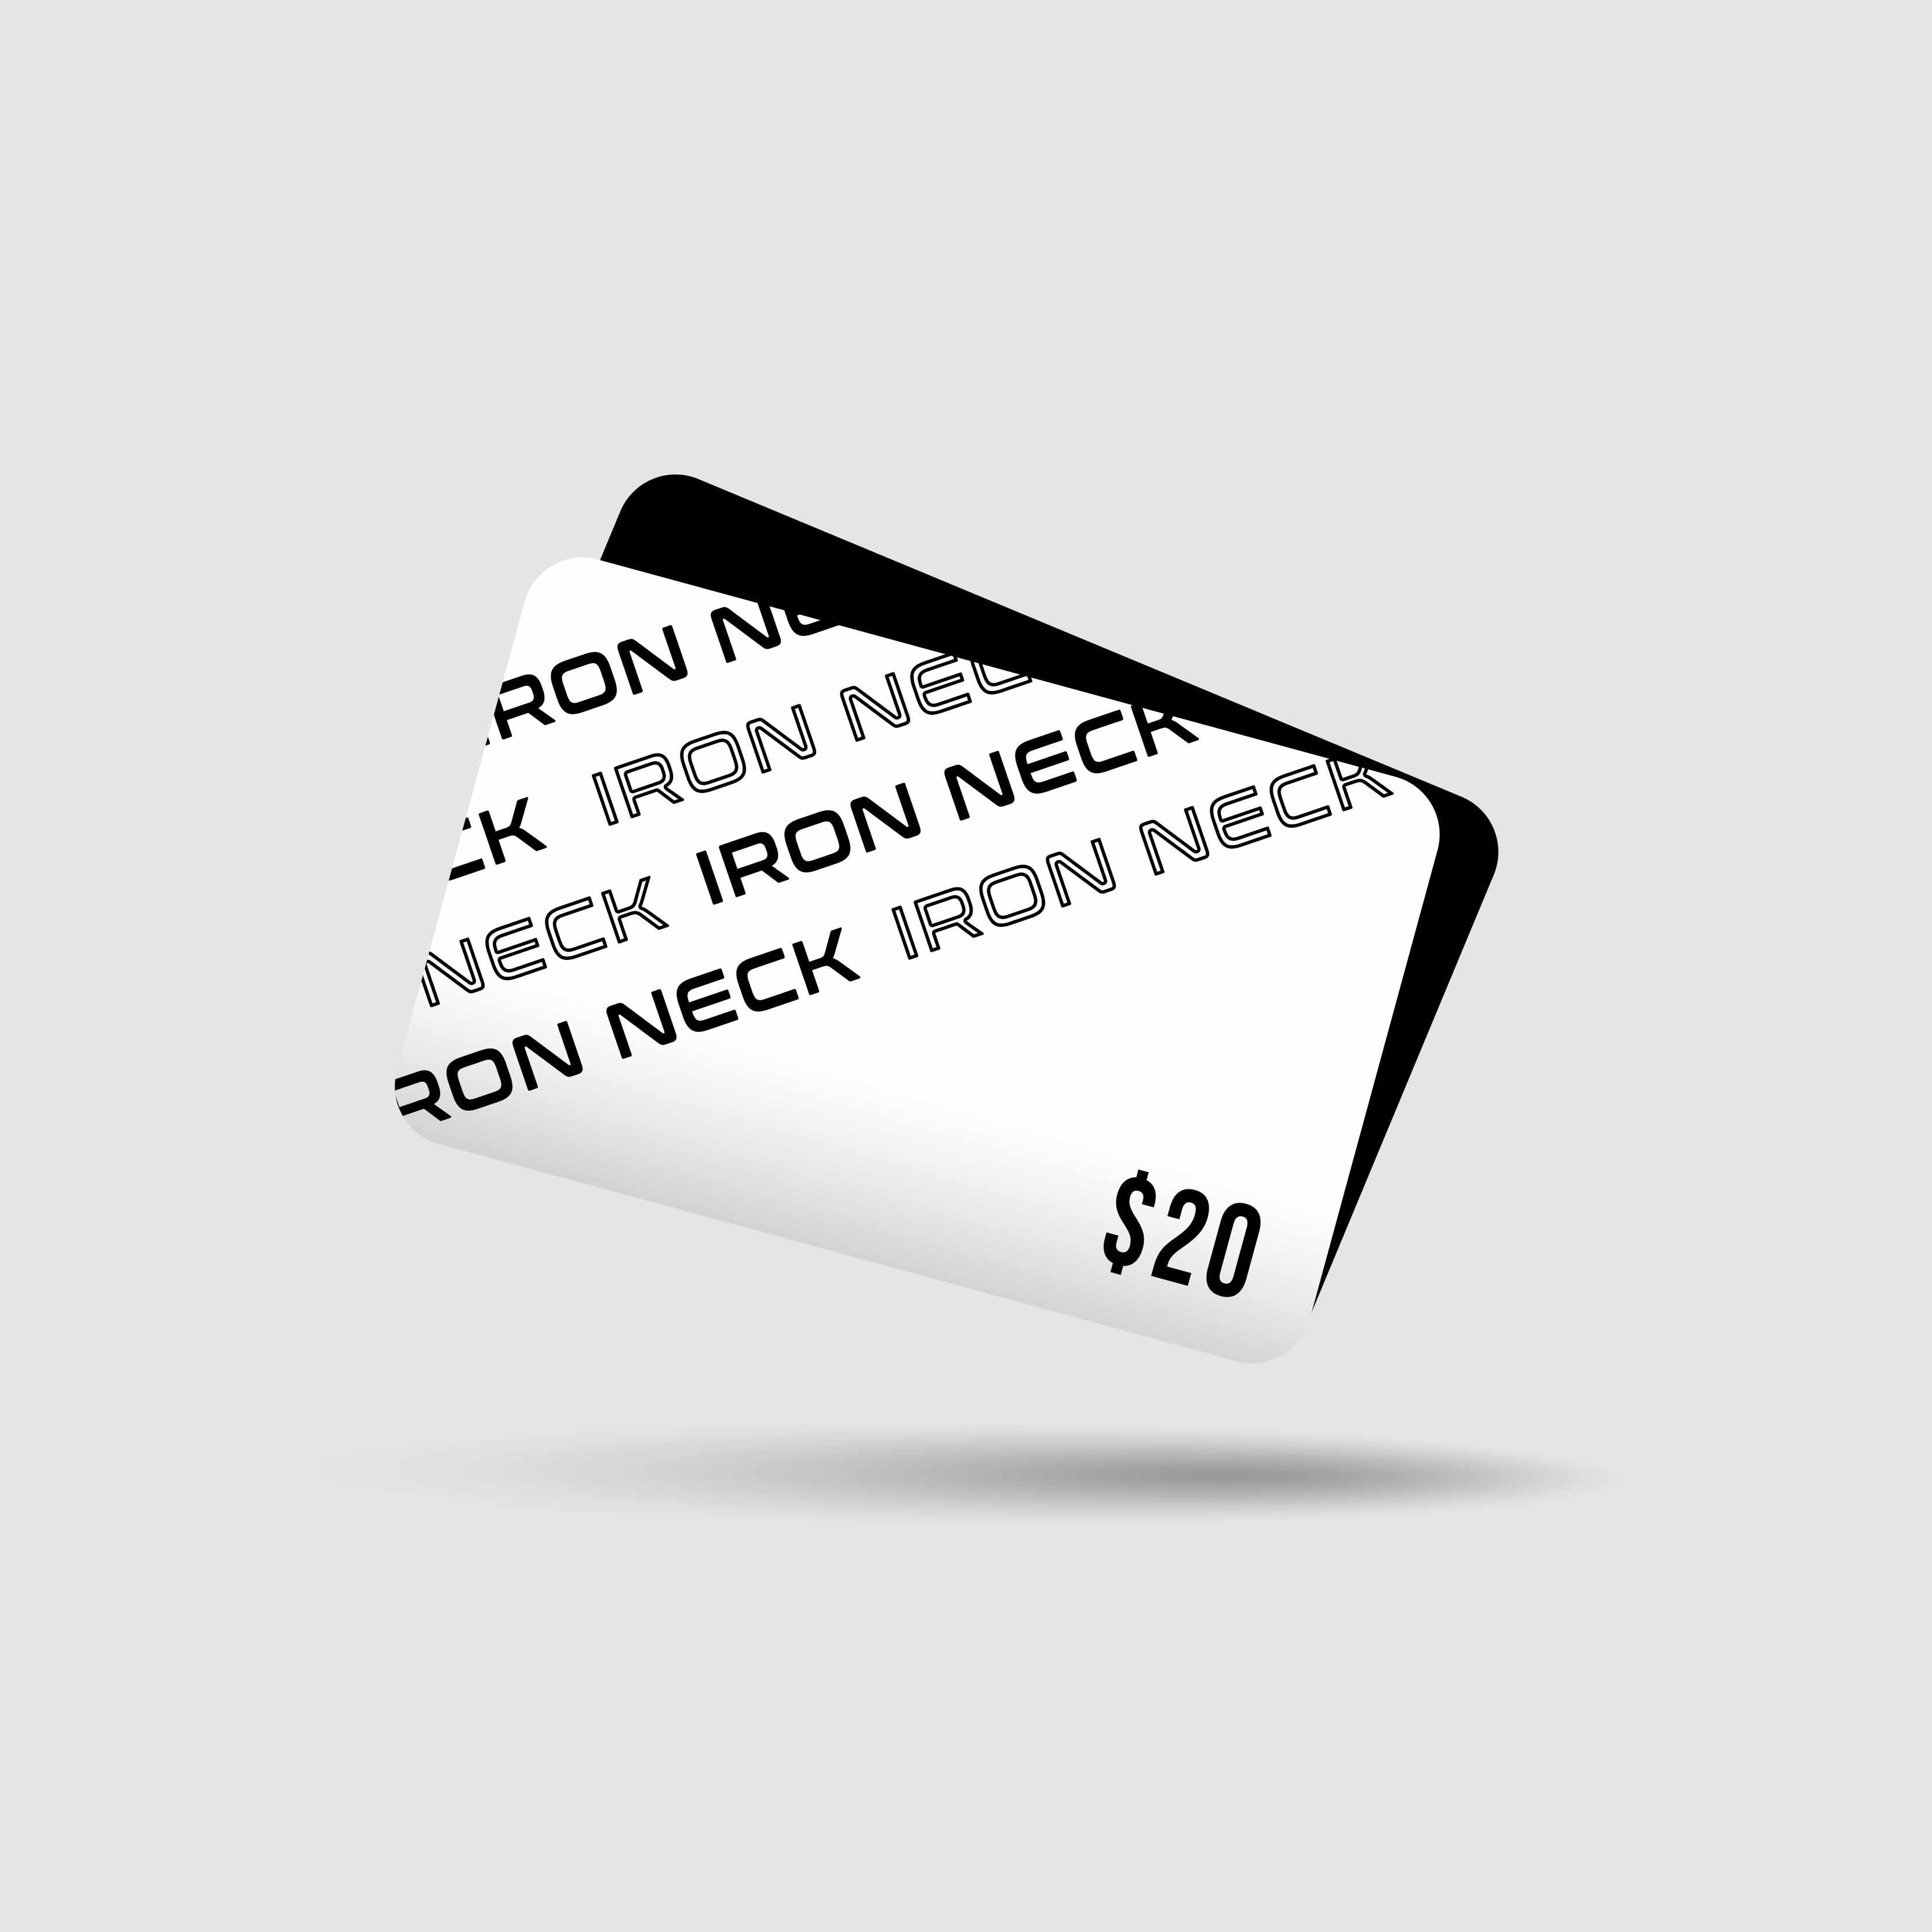 Gift Card Gift Card Iron Neck $20  